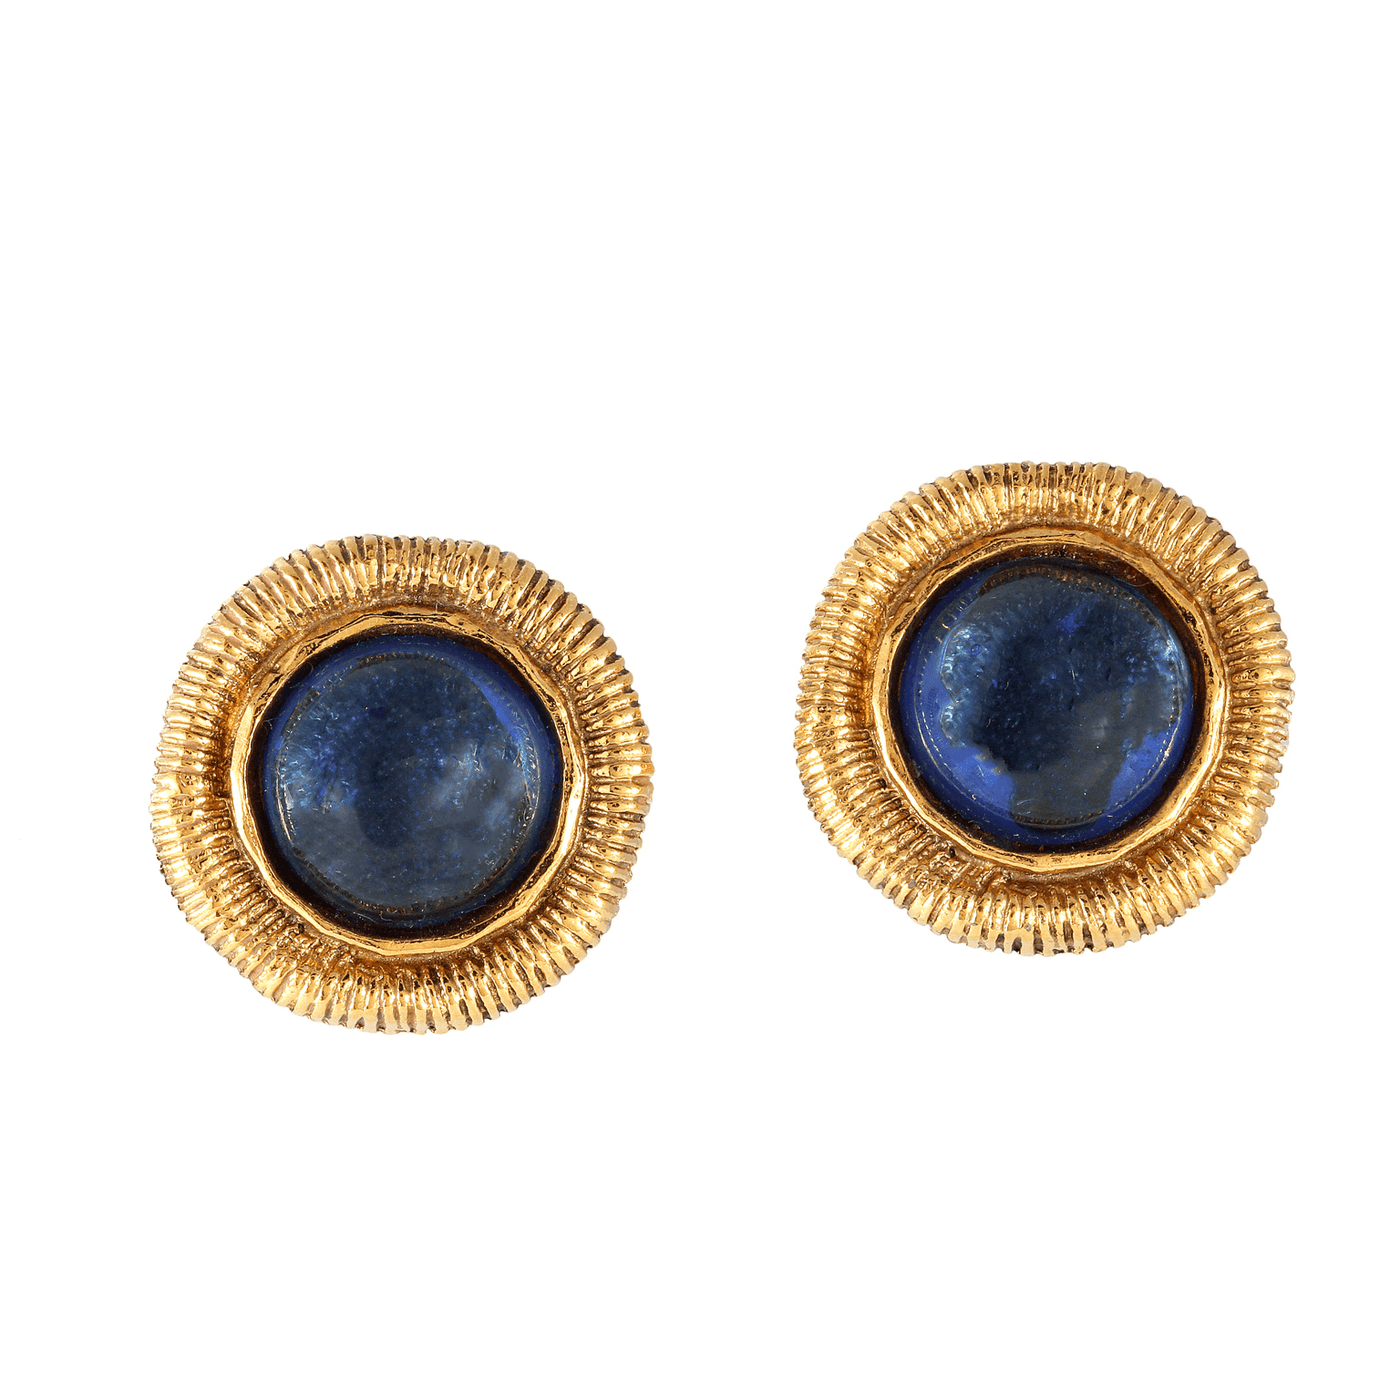 Chanel Blue Gripoix Gold Earrings - Only Authentics